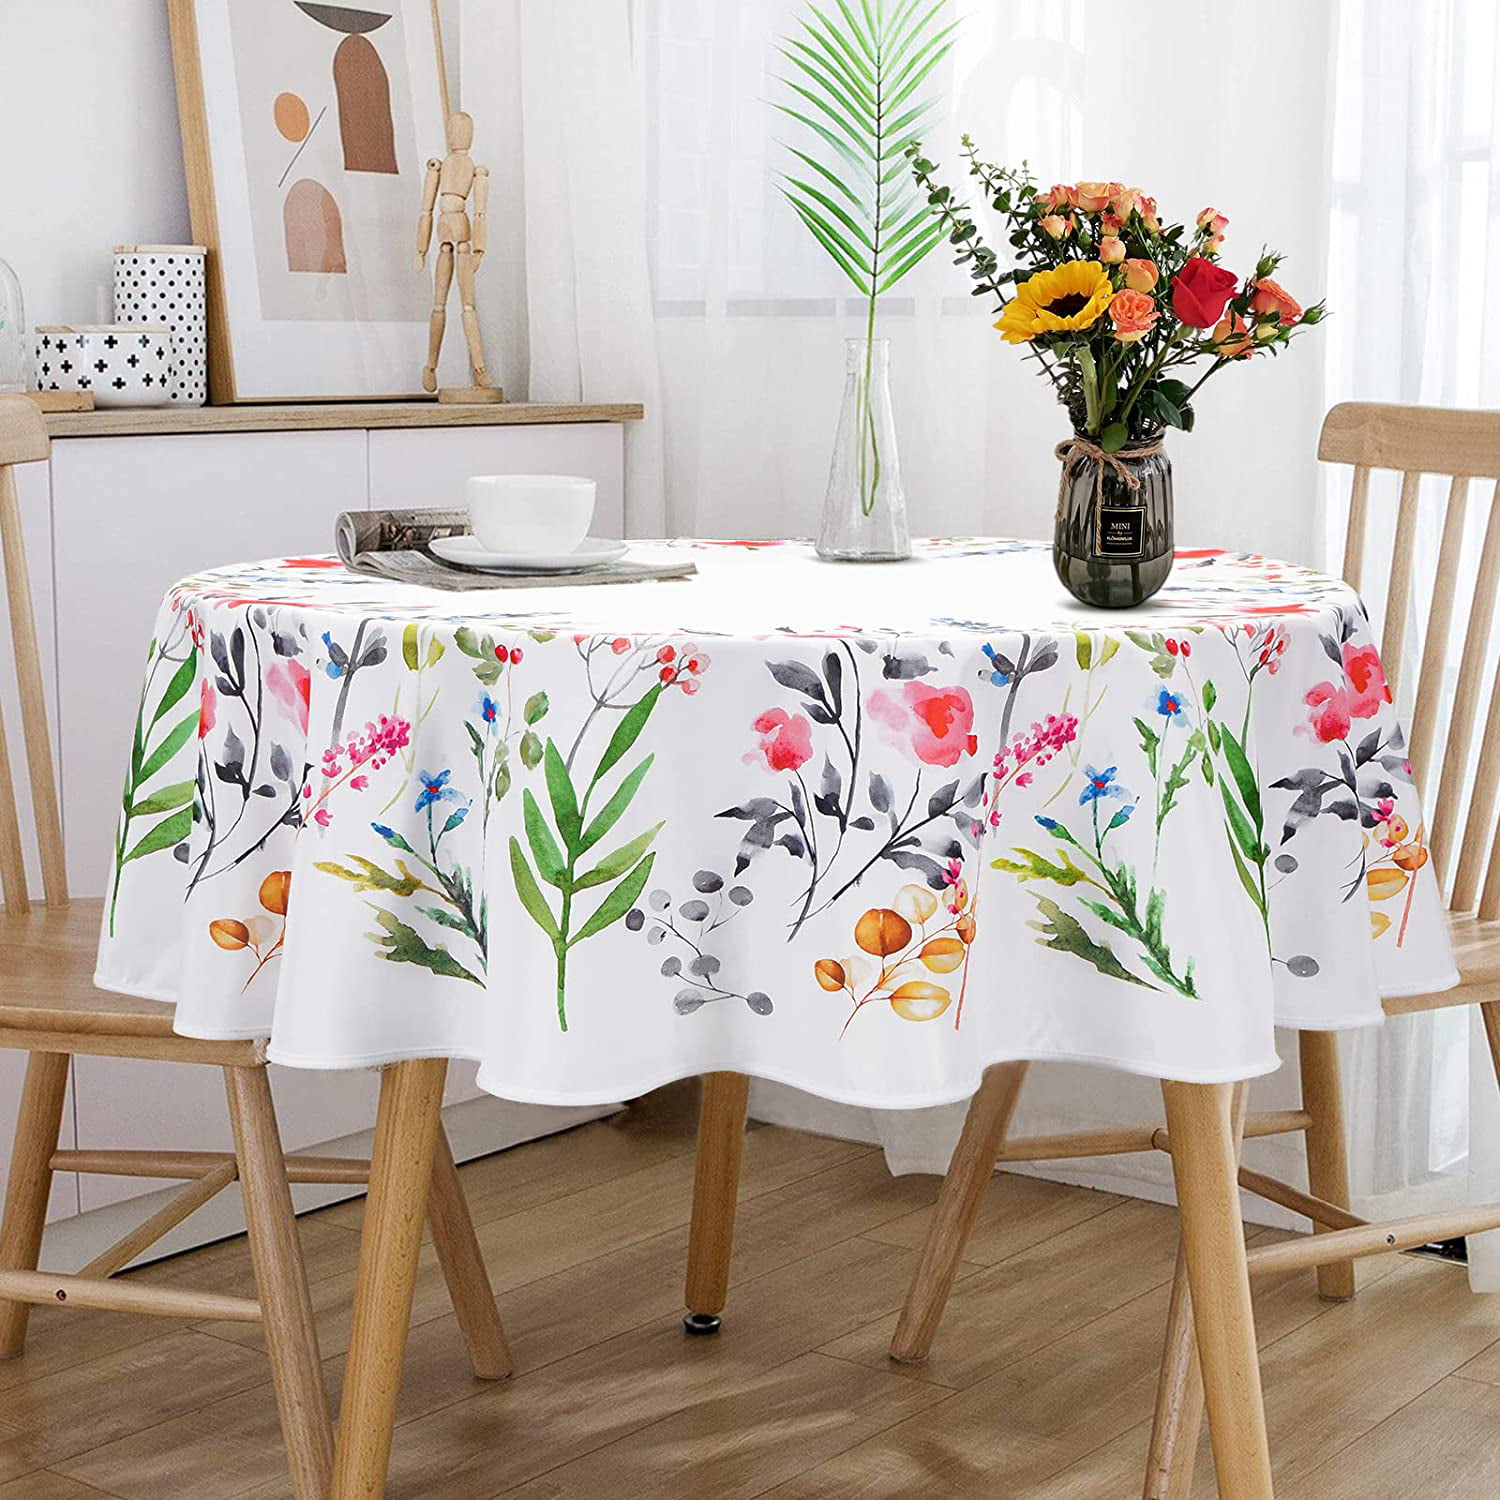 Black Fish Round Table Cloth Tablecloths Table Cover Fabric Tablecloth Round Dining Table Cloth for Kitchen